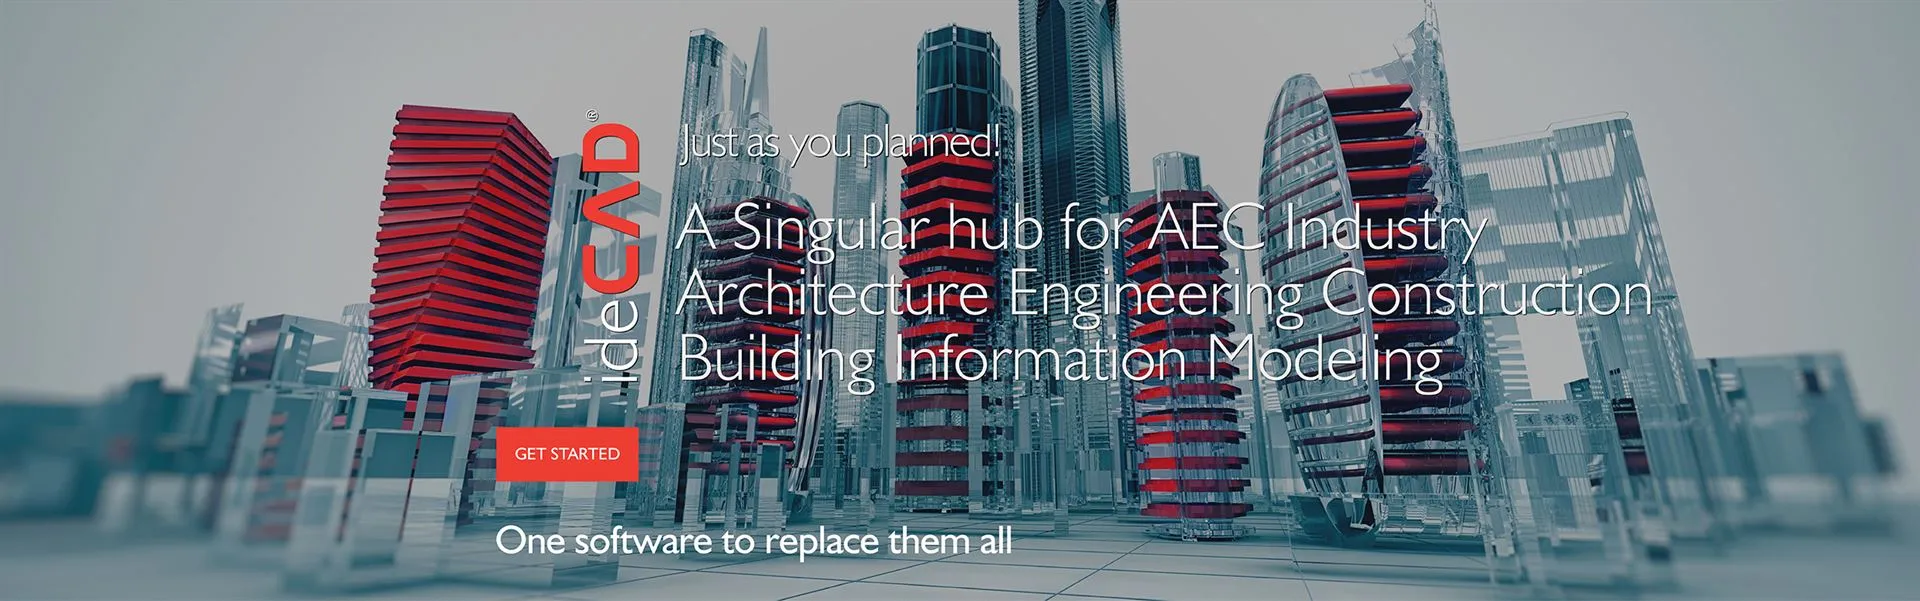 Try ideCAD One AEC Collection now for Collaborative Building Design, Architecture, Structural Engineering, and Construction BIM Software Solution.